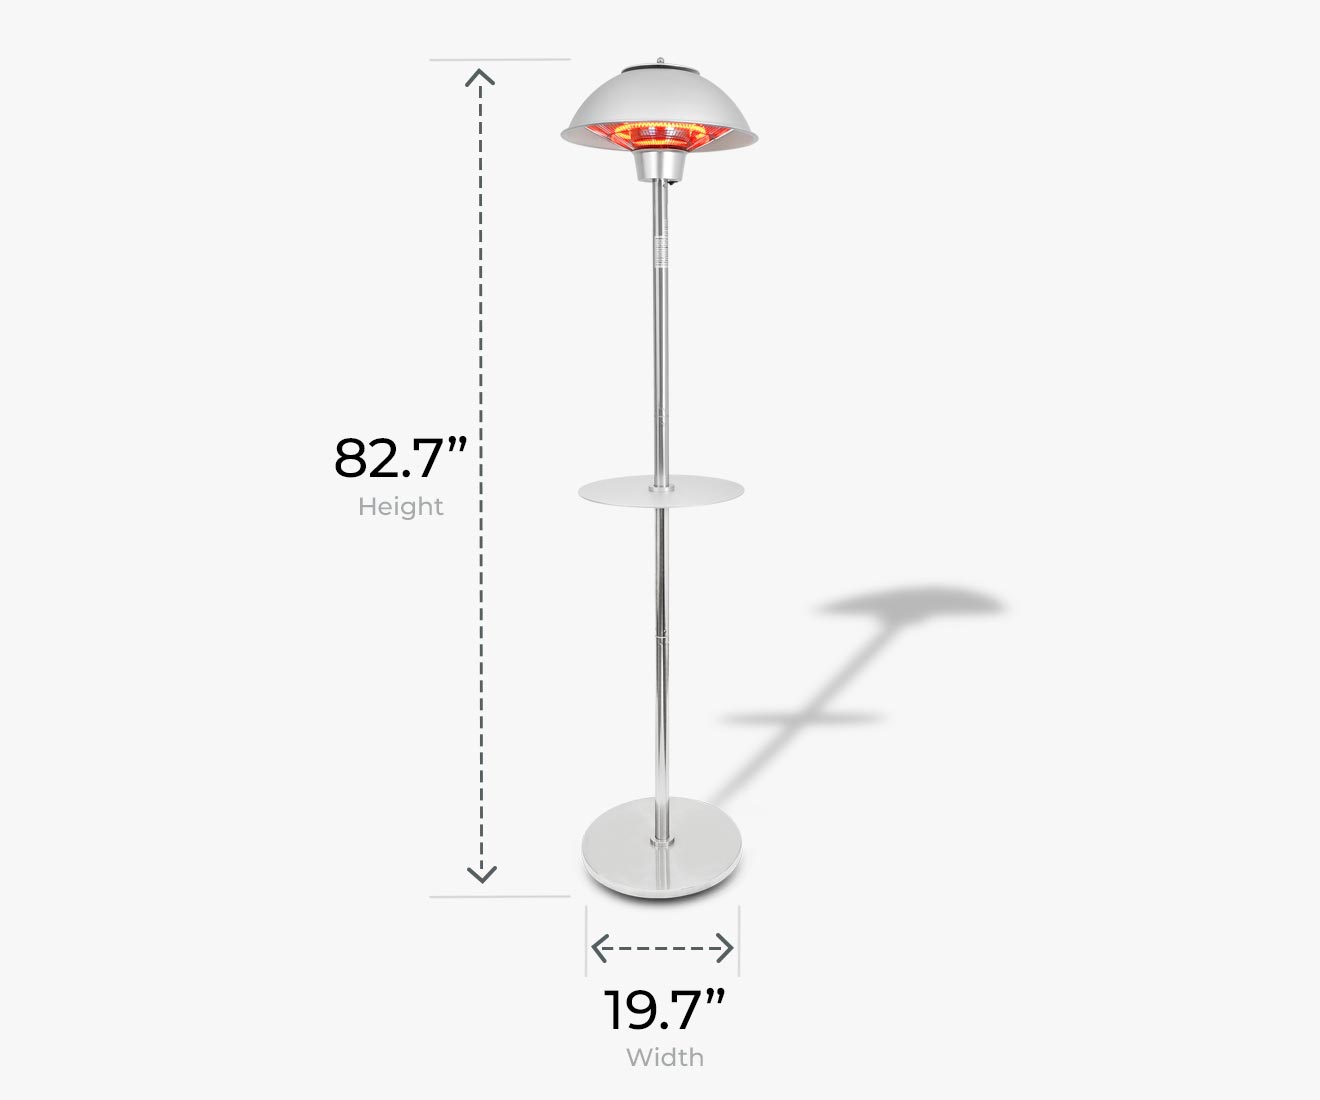 Permasteel PH-90202-SS 1500W Electric Infrared Stainless Steel Patio Heater with Table Compact Dimensions